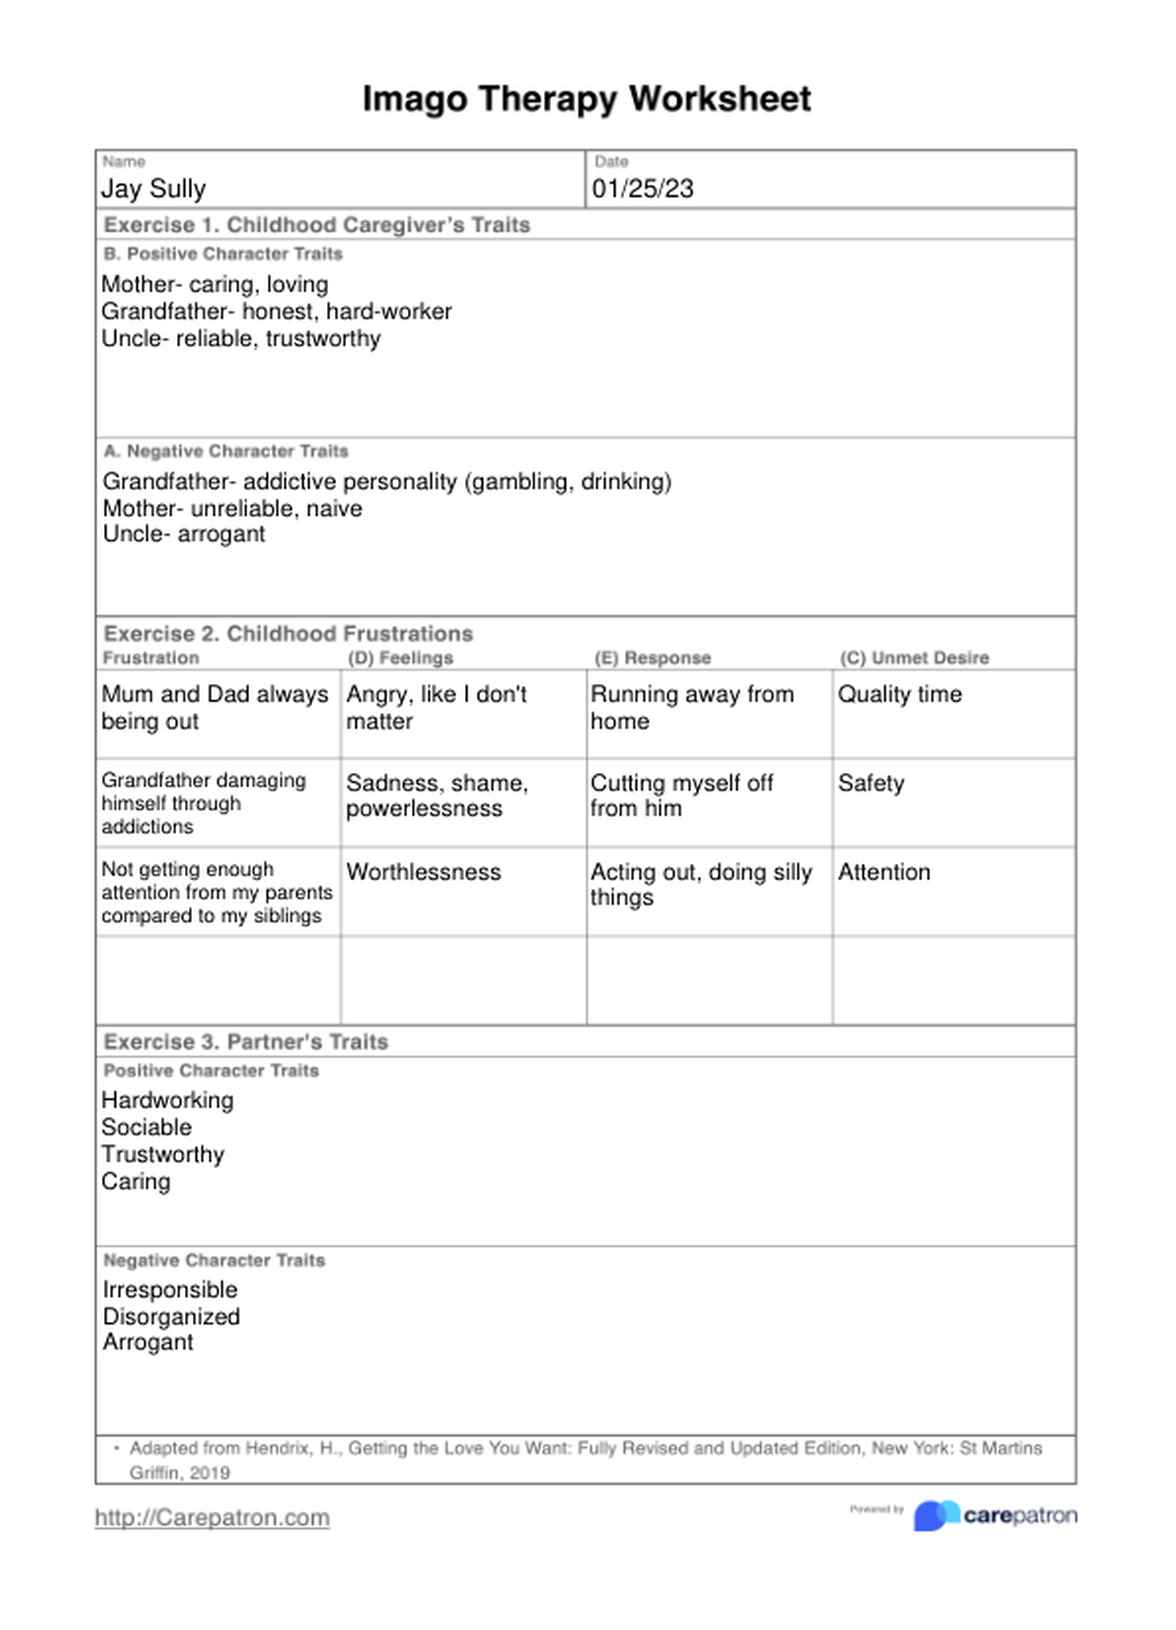 Imago Therapy Worksheets PDF Example